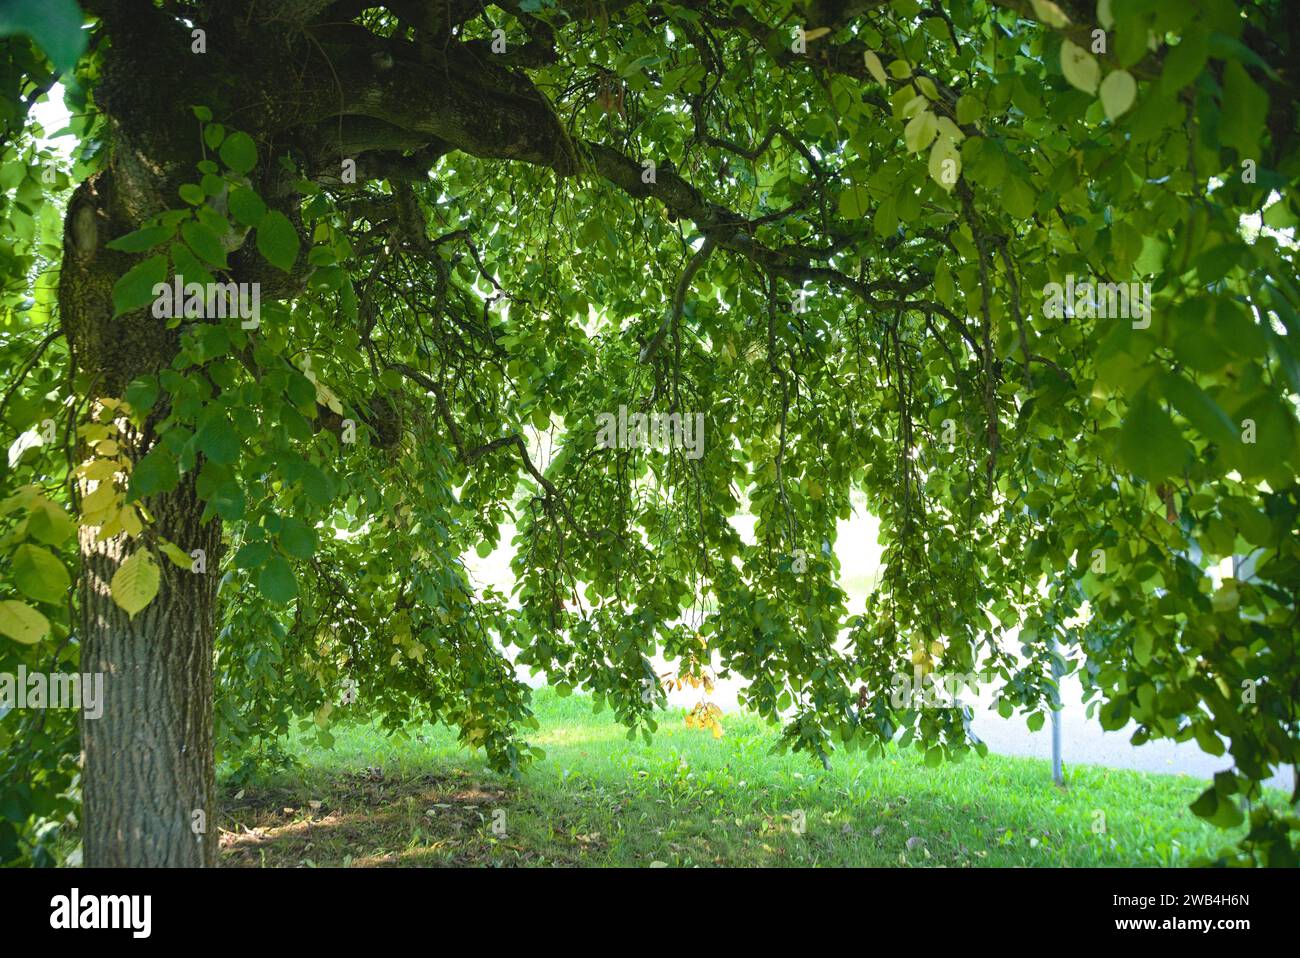 Umbrella-like Shape Of The Berry-elm In Detail - Deciduous Tree And Hardwood Hanging Elm Stock Photo